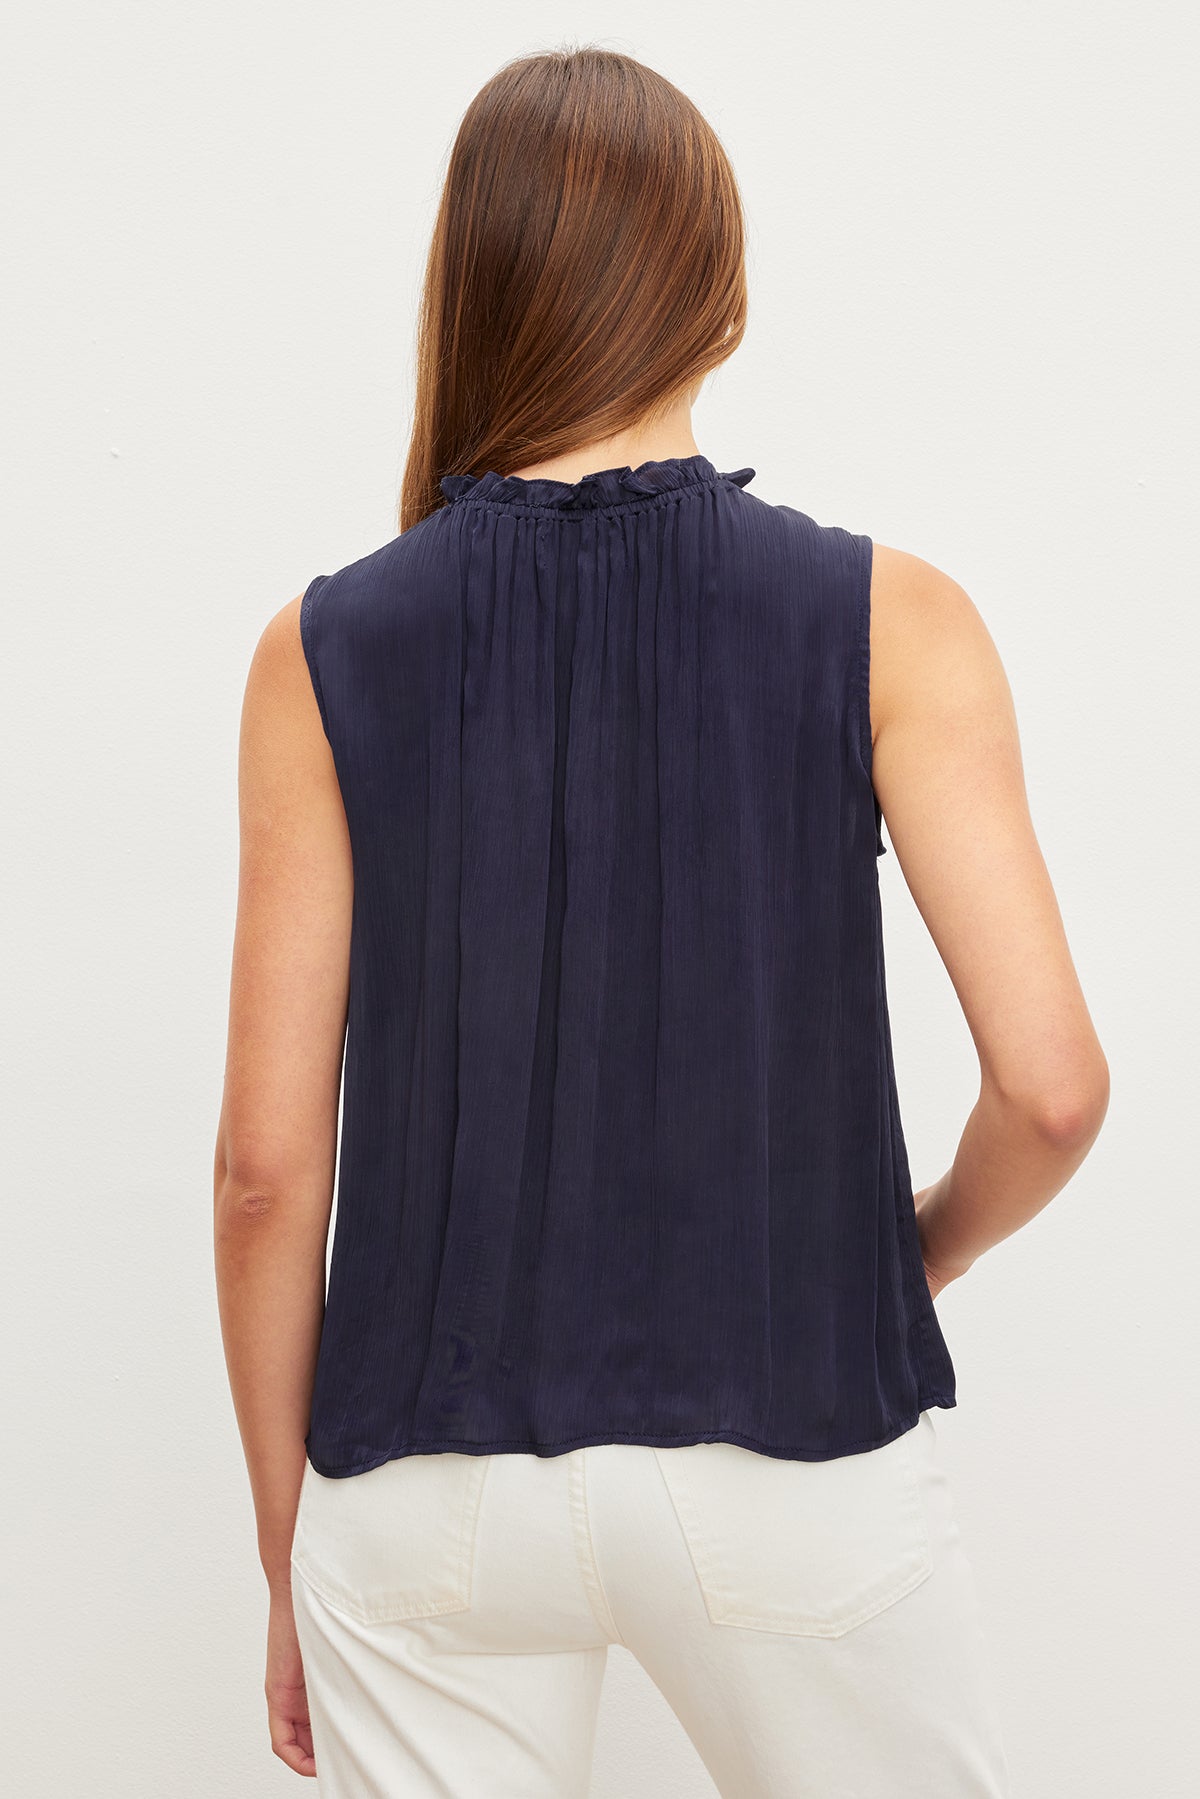   Woman seen from behind, wearing a navy KIANA RUFFLE NECK TANK TOP by Velvet by Graham & Spencer and white pants, standing against a neutral background. 